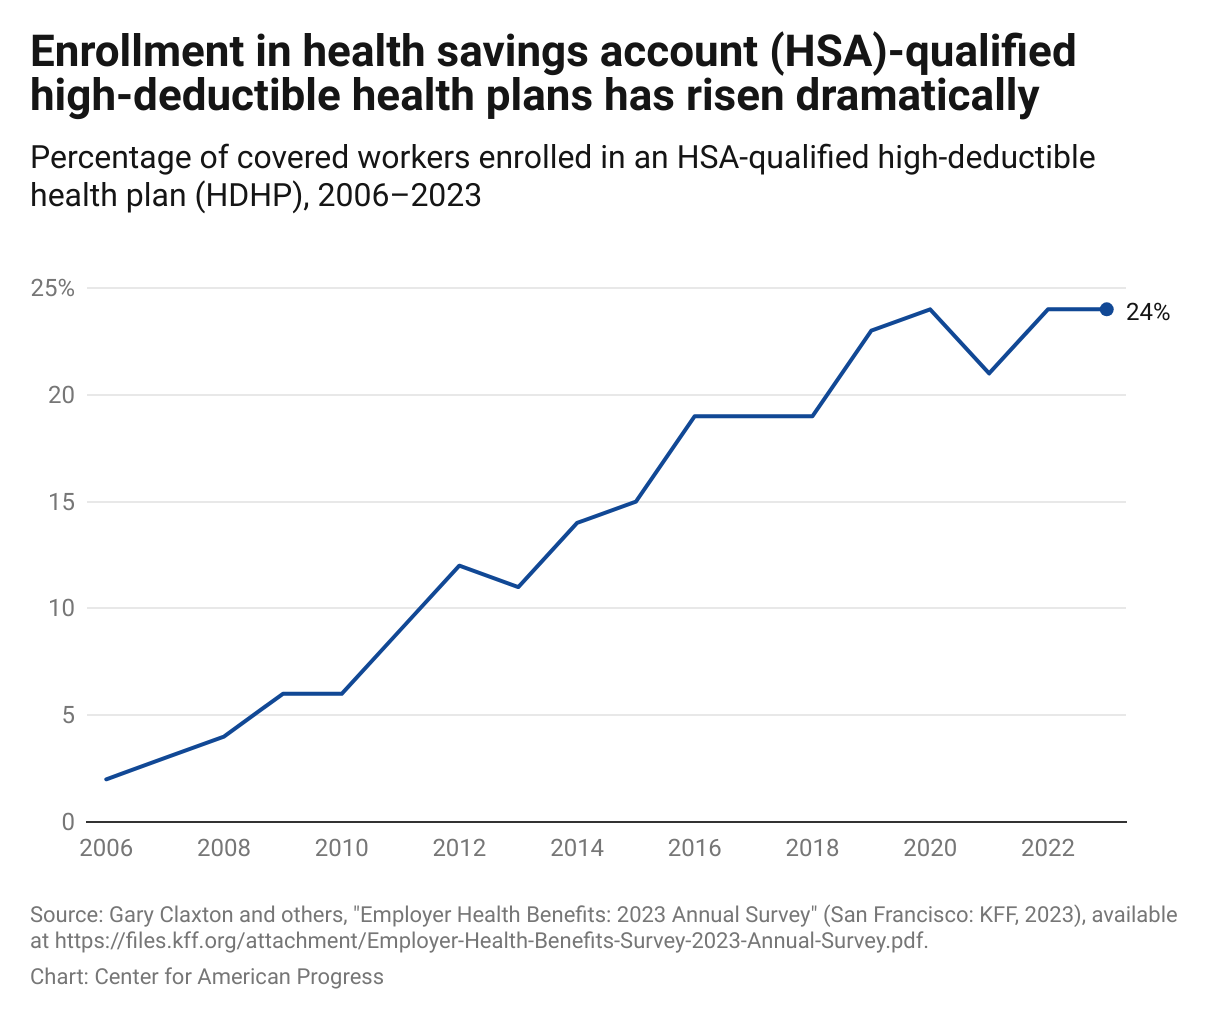 Graph showing that from 2006 to 2023, enrollment in HSA-qualified high-deductible health insurance plans has risen from 2 percent to 24 percent.